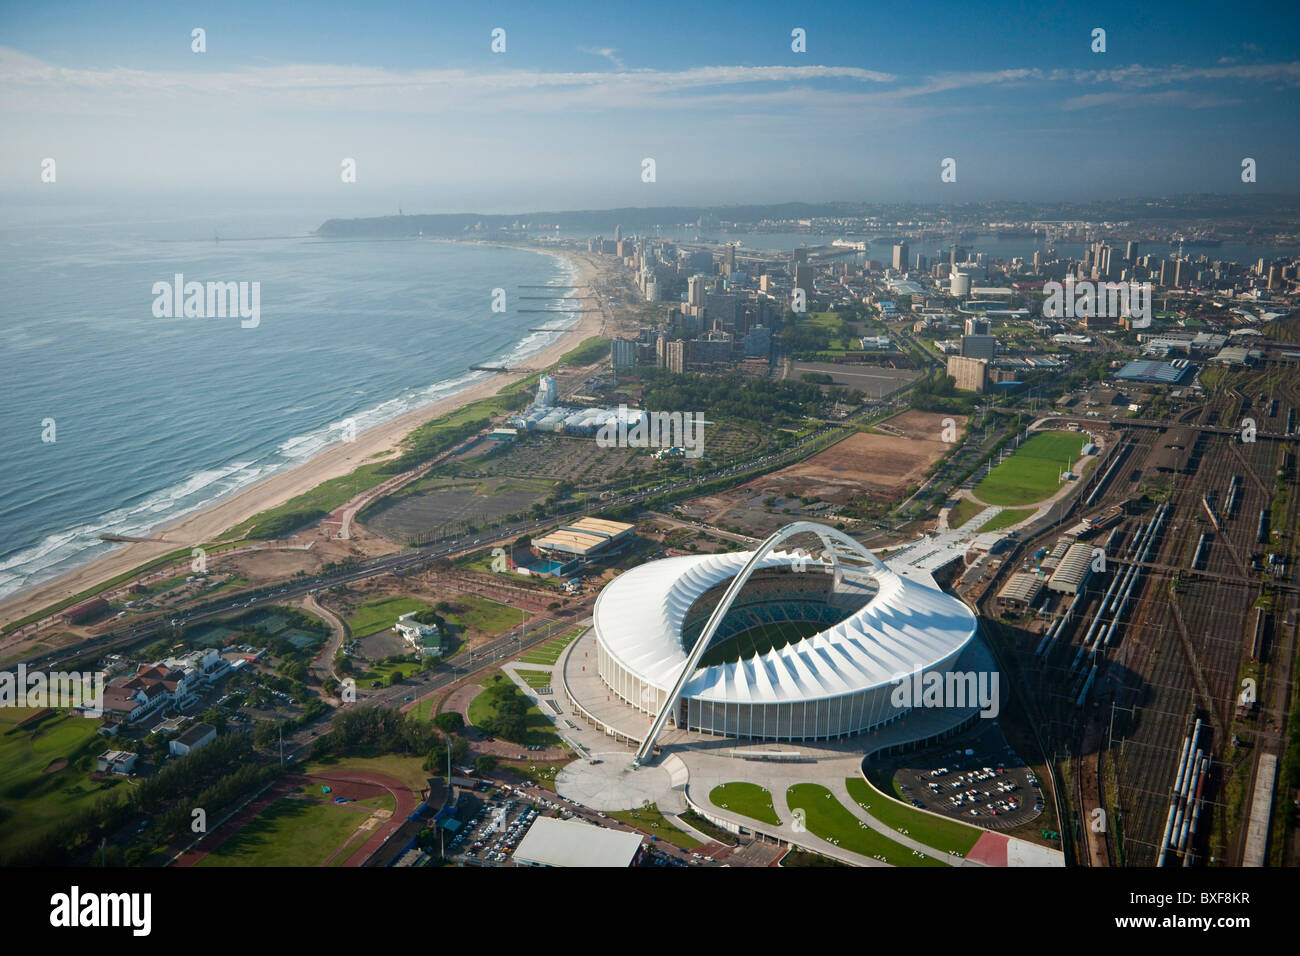 Aerial view of Durban showing The Moses Mabhida Stadium and city in the background. KwaZulu Natal. South Africa. Stock Photo